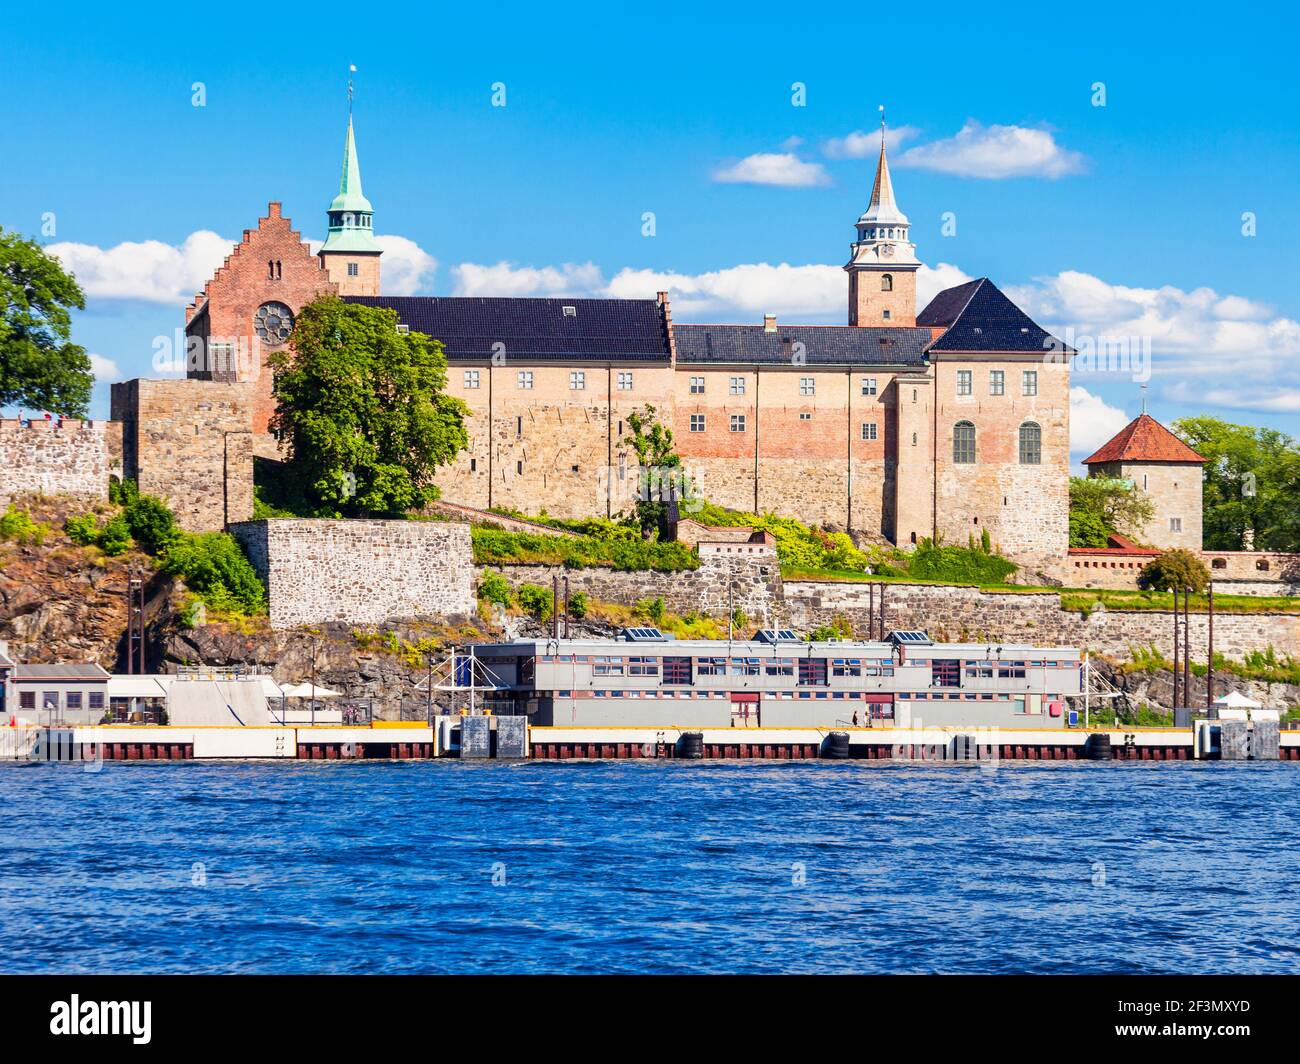 Akershus Fortress in Oslo, Norway. Akershus Festning is a medieval fortress that was built to protect Oslo. Stock Photo